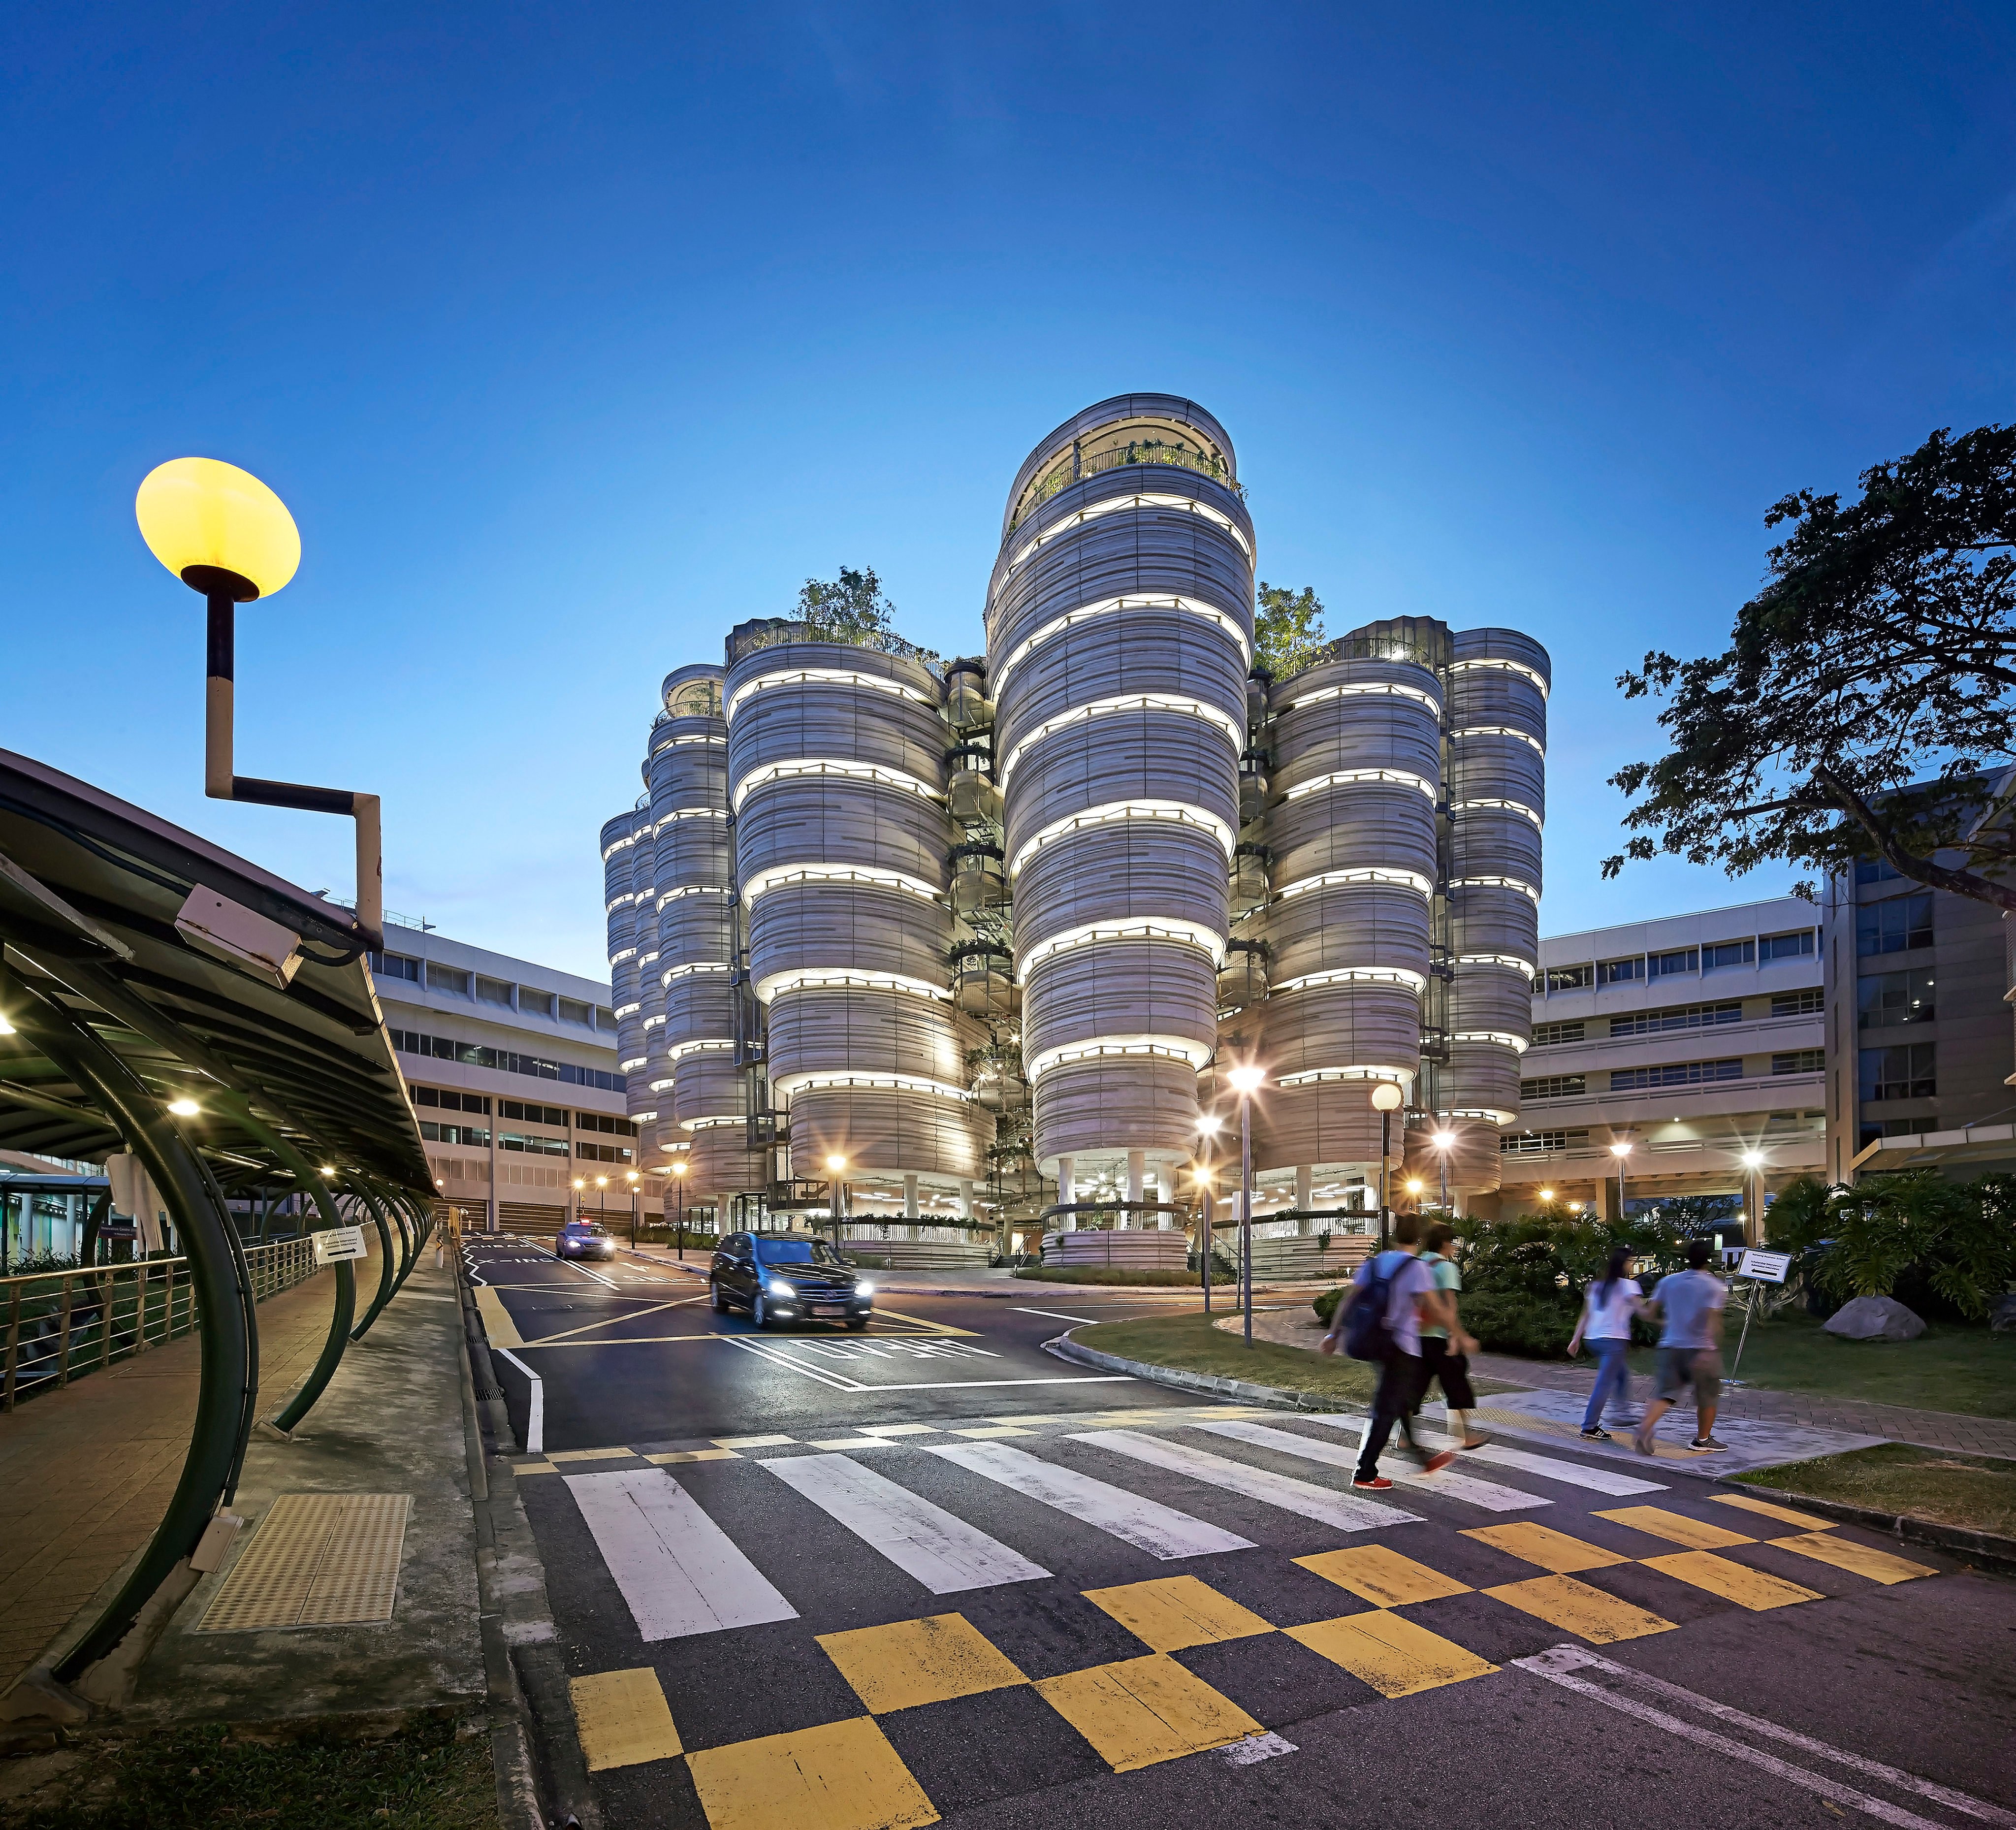 The Learning Hub building in Nanyang Technological University. Photo: Getty Images